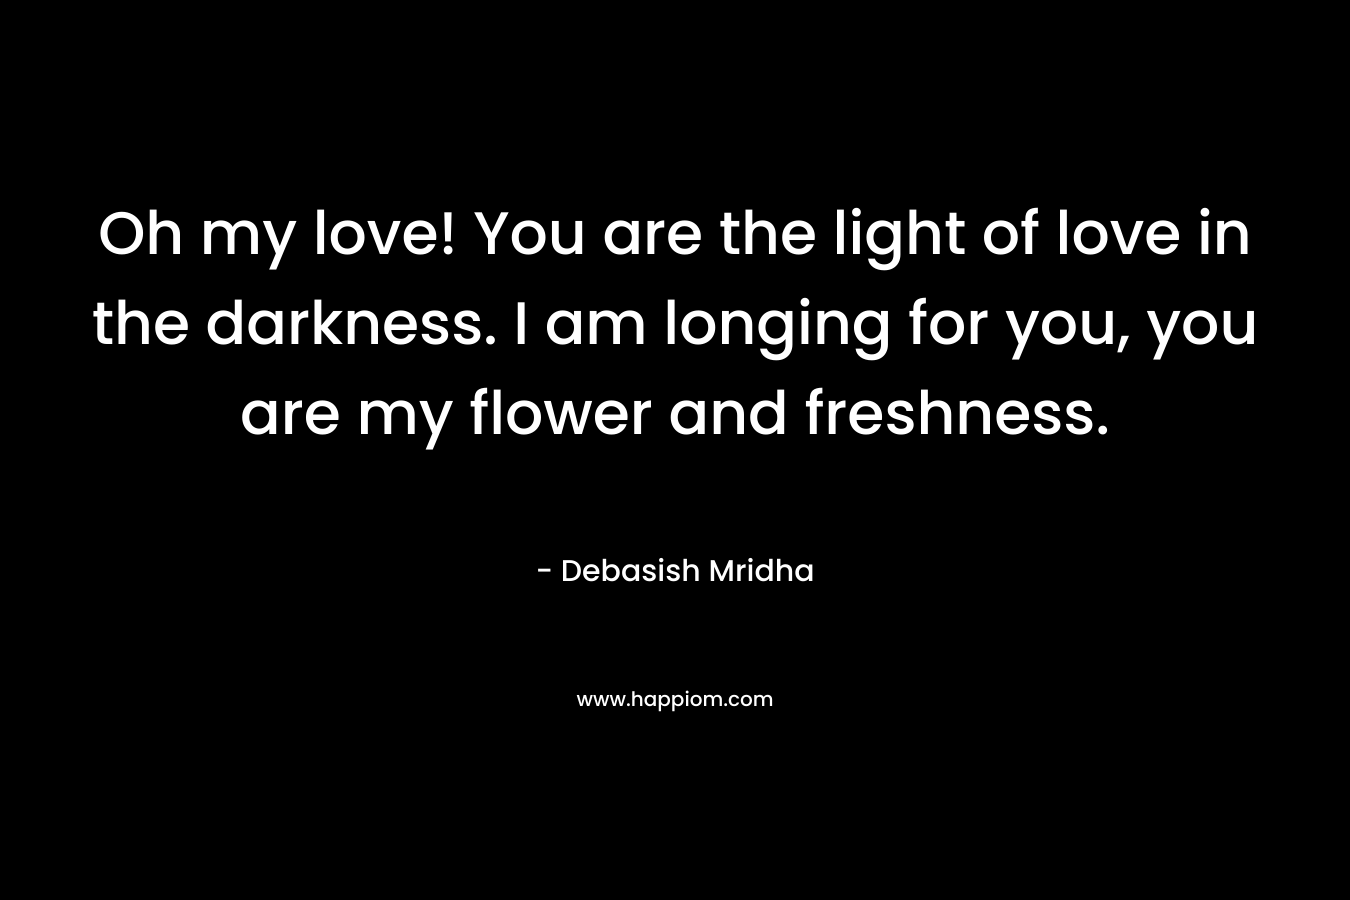 Oh my love! You are the light of love in the darkness. I am longing for you, you are my flower and freshness. – Debasish Mridha